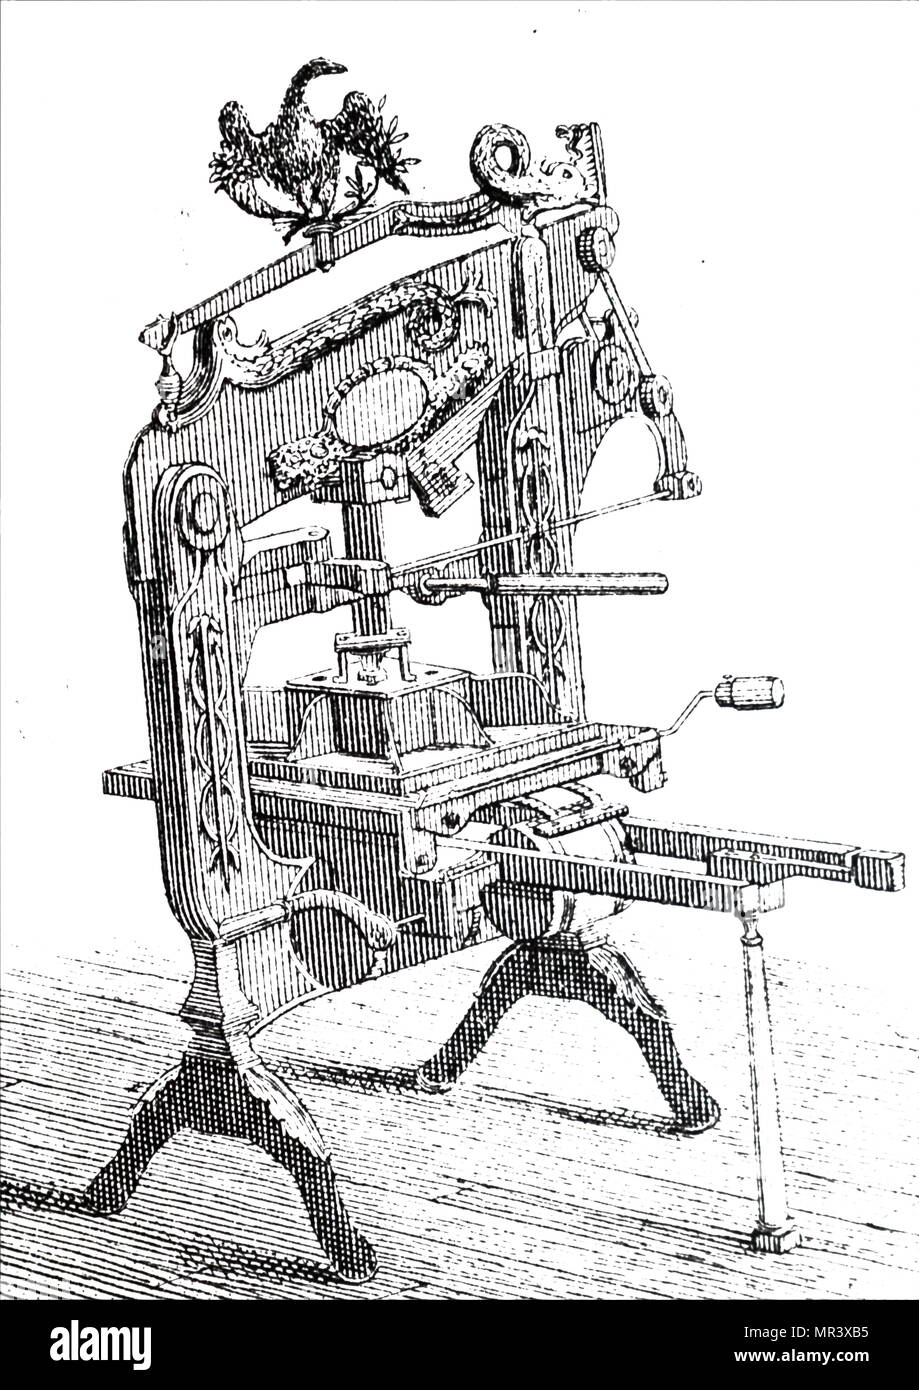 Engraving depicting the Columbian hand printing press, invented by George Clymer. Power was applied to the plate by means of a compound lever. George Clymer (1739-1813) an American politician, inventor, and Found Father of the United States. Dated 19th century Stock Photo